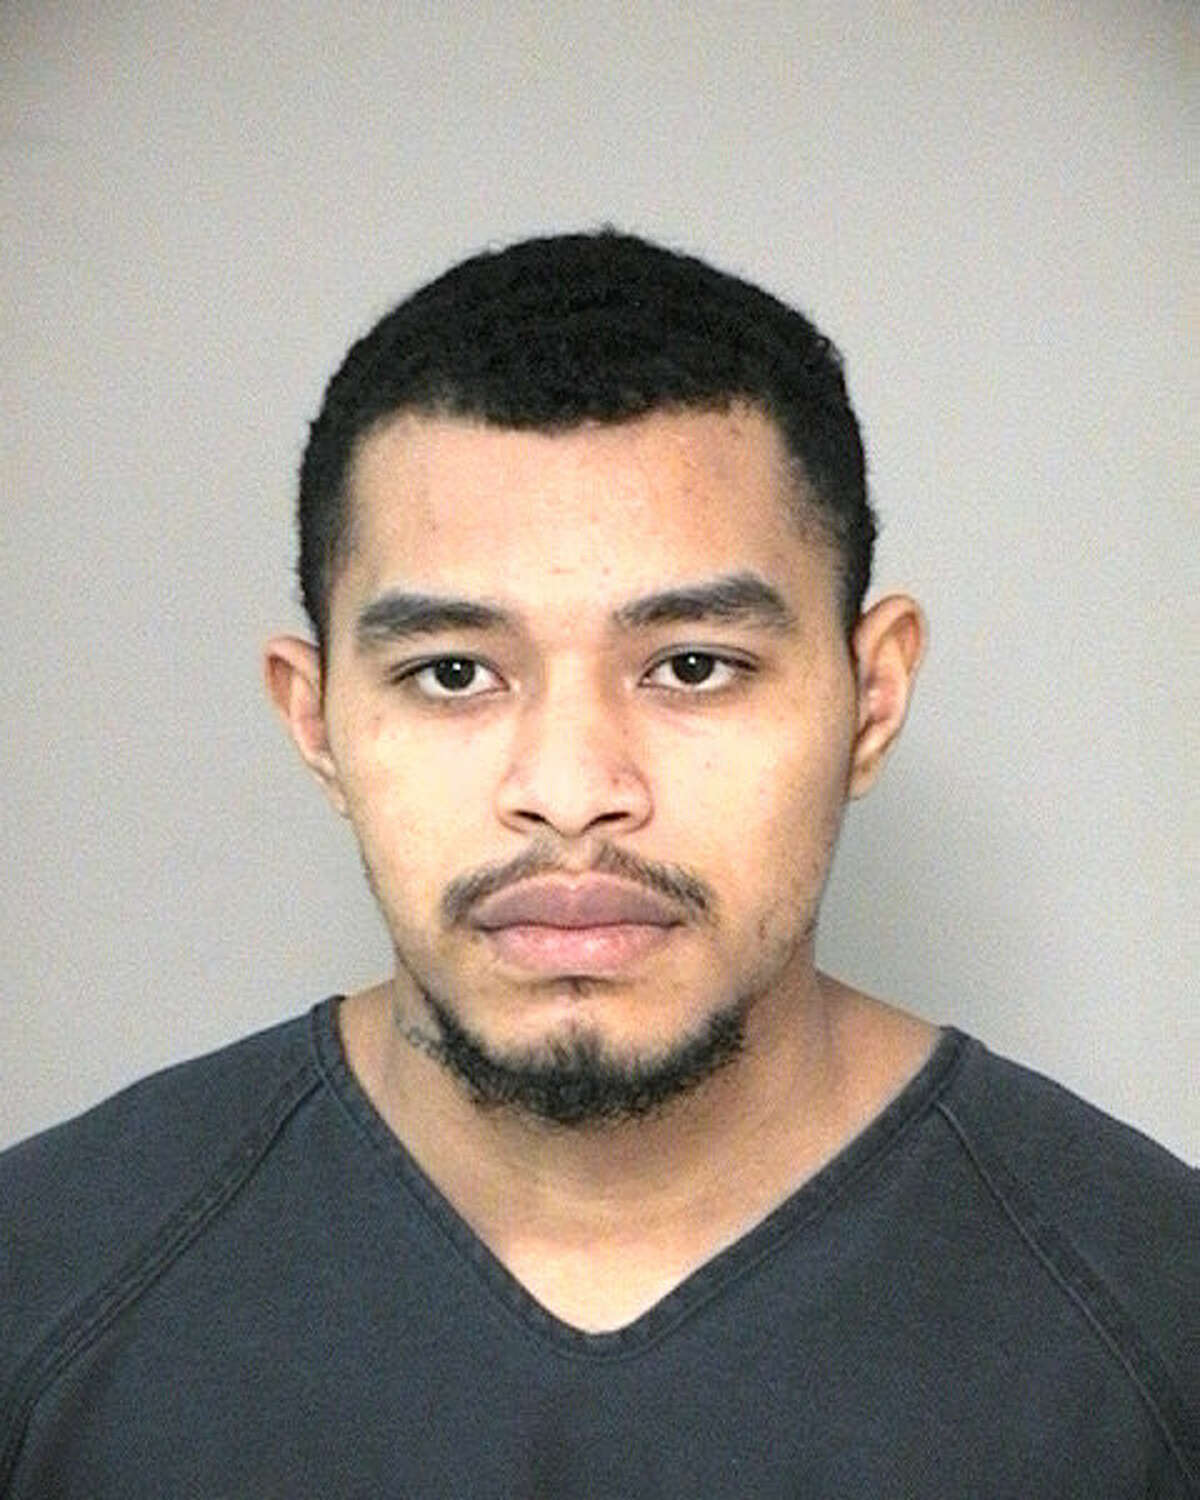 Sergio Rodriguez plead guilty Monday, May 22, 2017 in Fort Bend County to aggravated assault of a public servant.